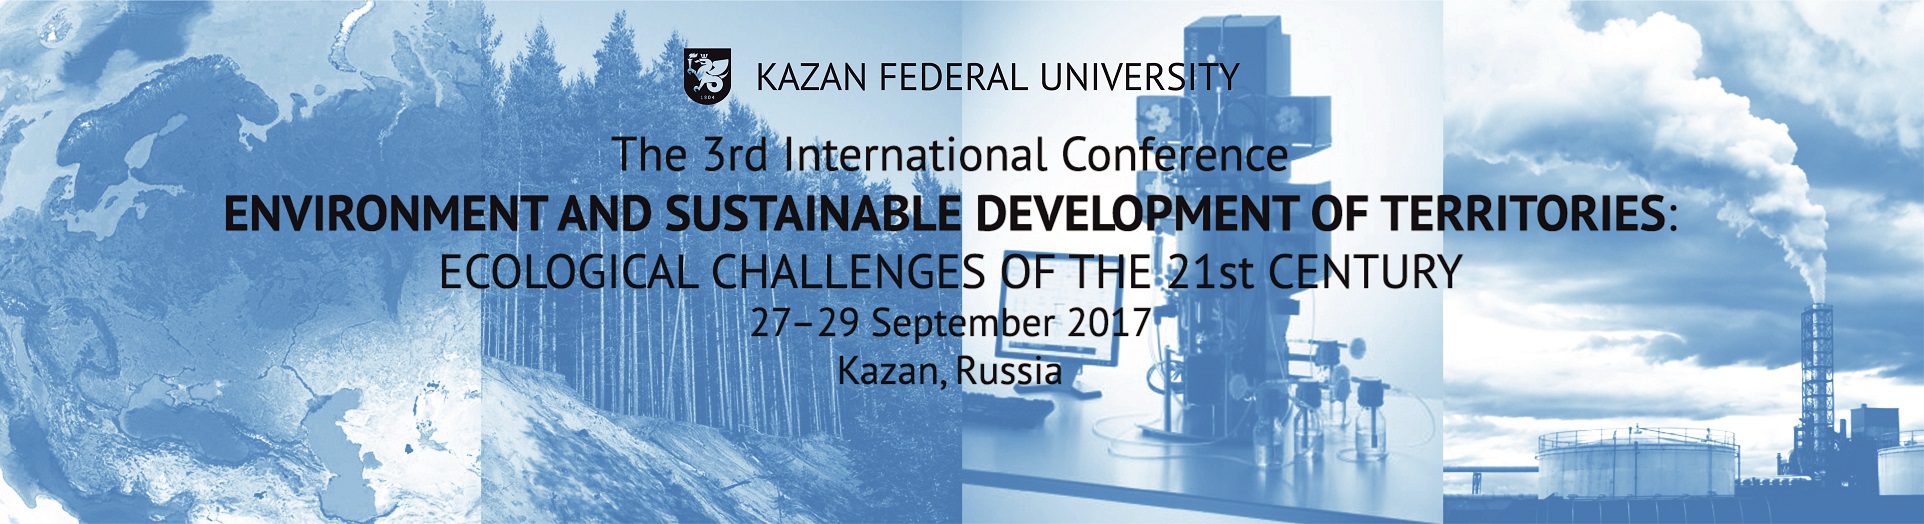 ПОРТАЛ КФУ \ Academic Units \ Natural Sciences \ Institute of Environmental Sciences \ Environment and Sustainable Development of Territories: Ecological Challenges of the 21st Century \ Registration and Abstract/Paper Submission